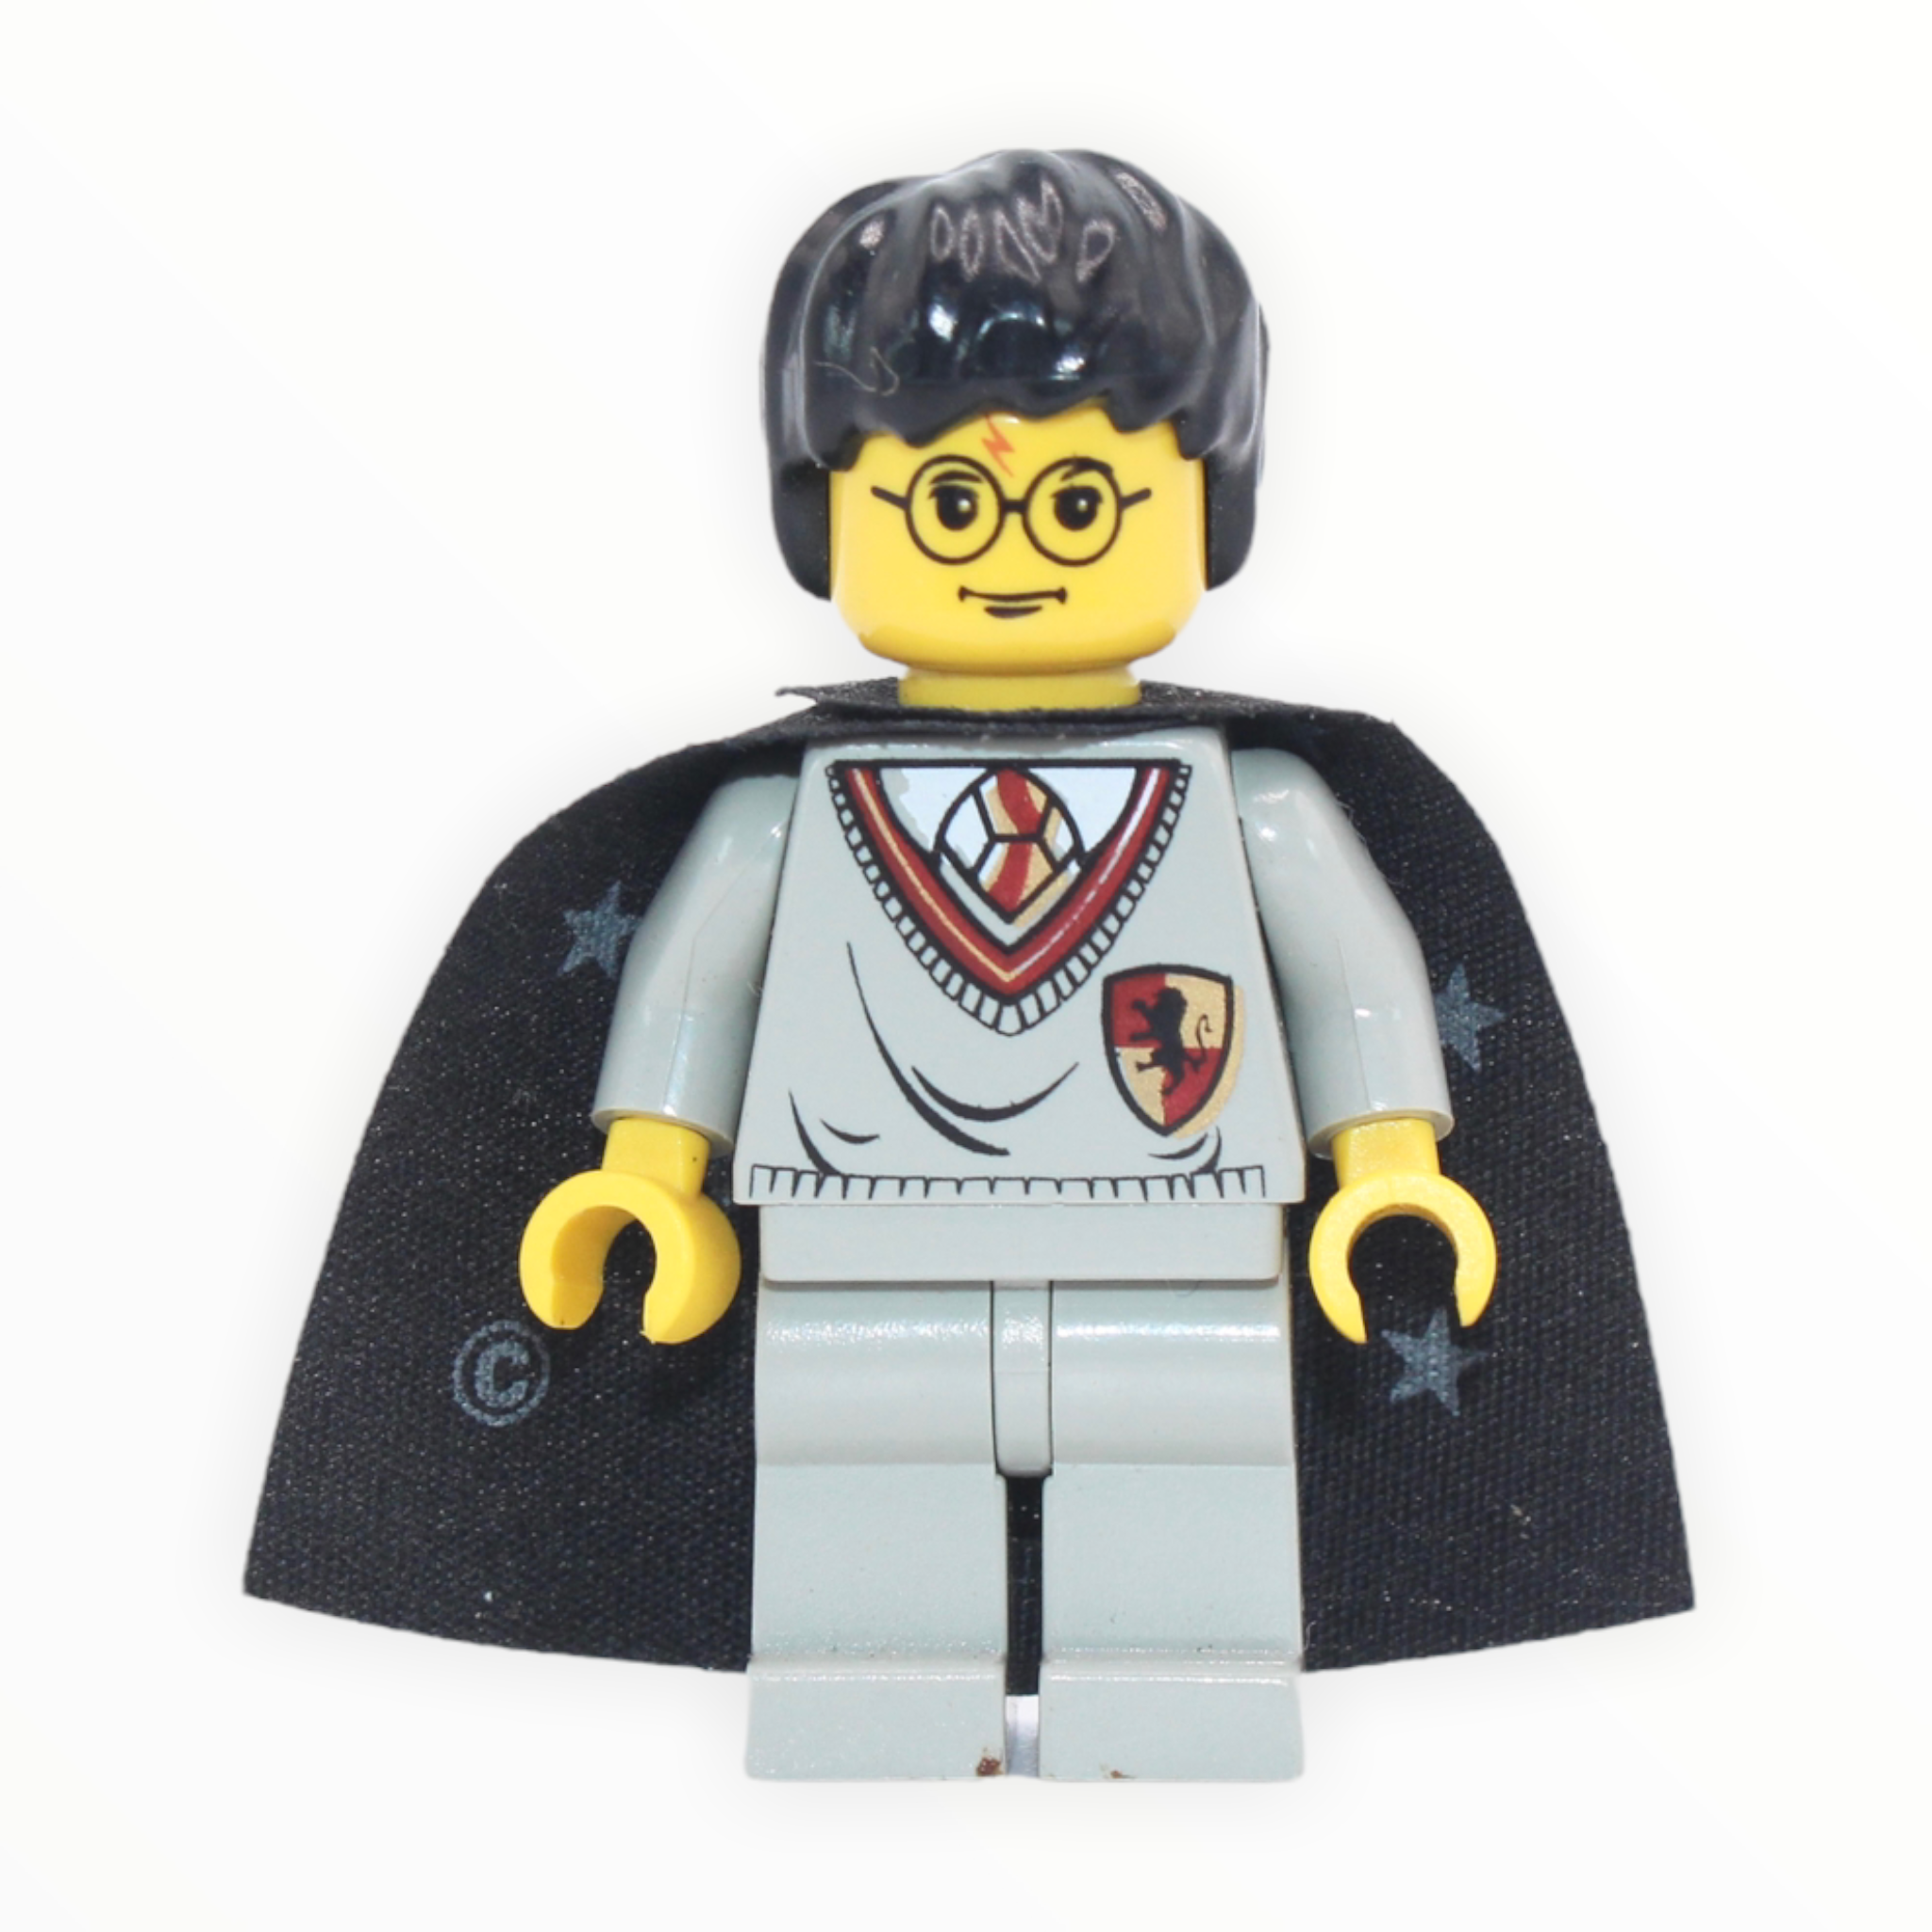 Harry Potter (Gryffindor sweater, star cape, yellow skin)